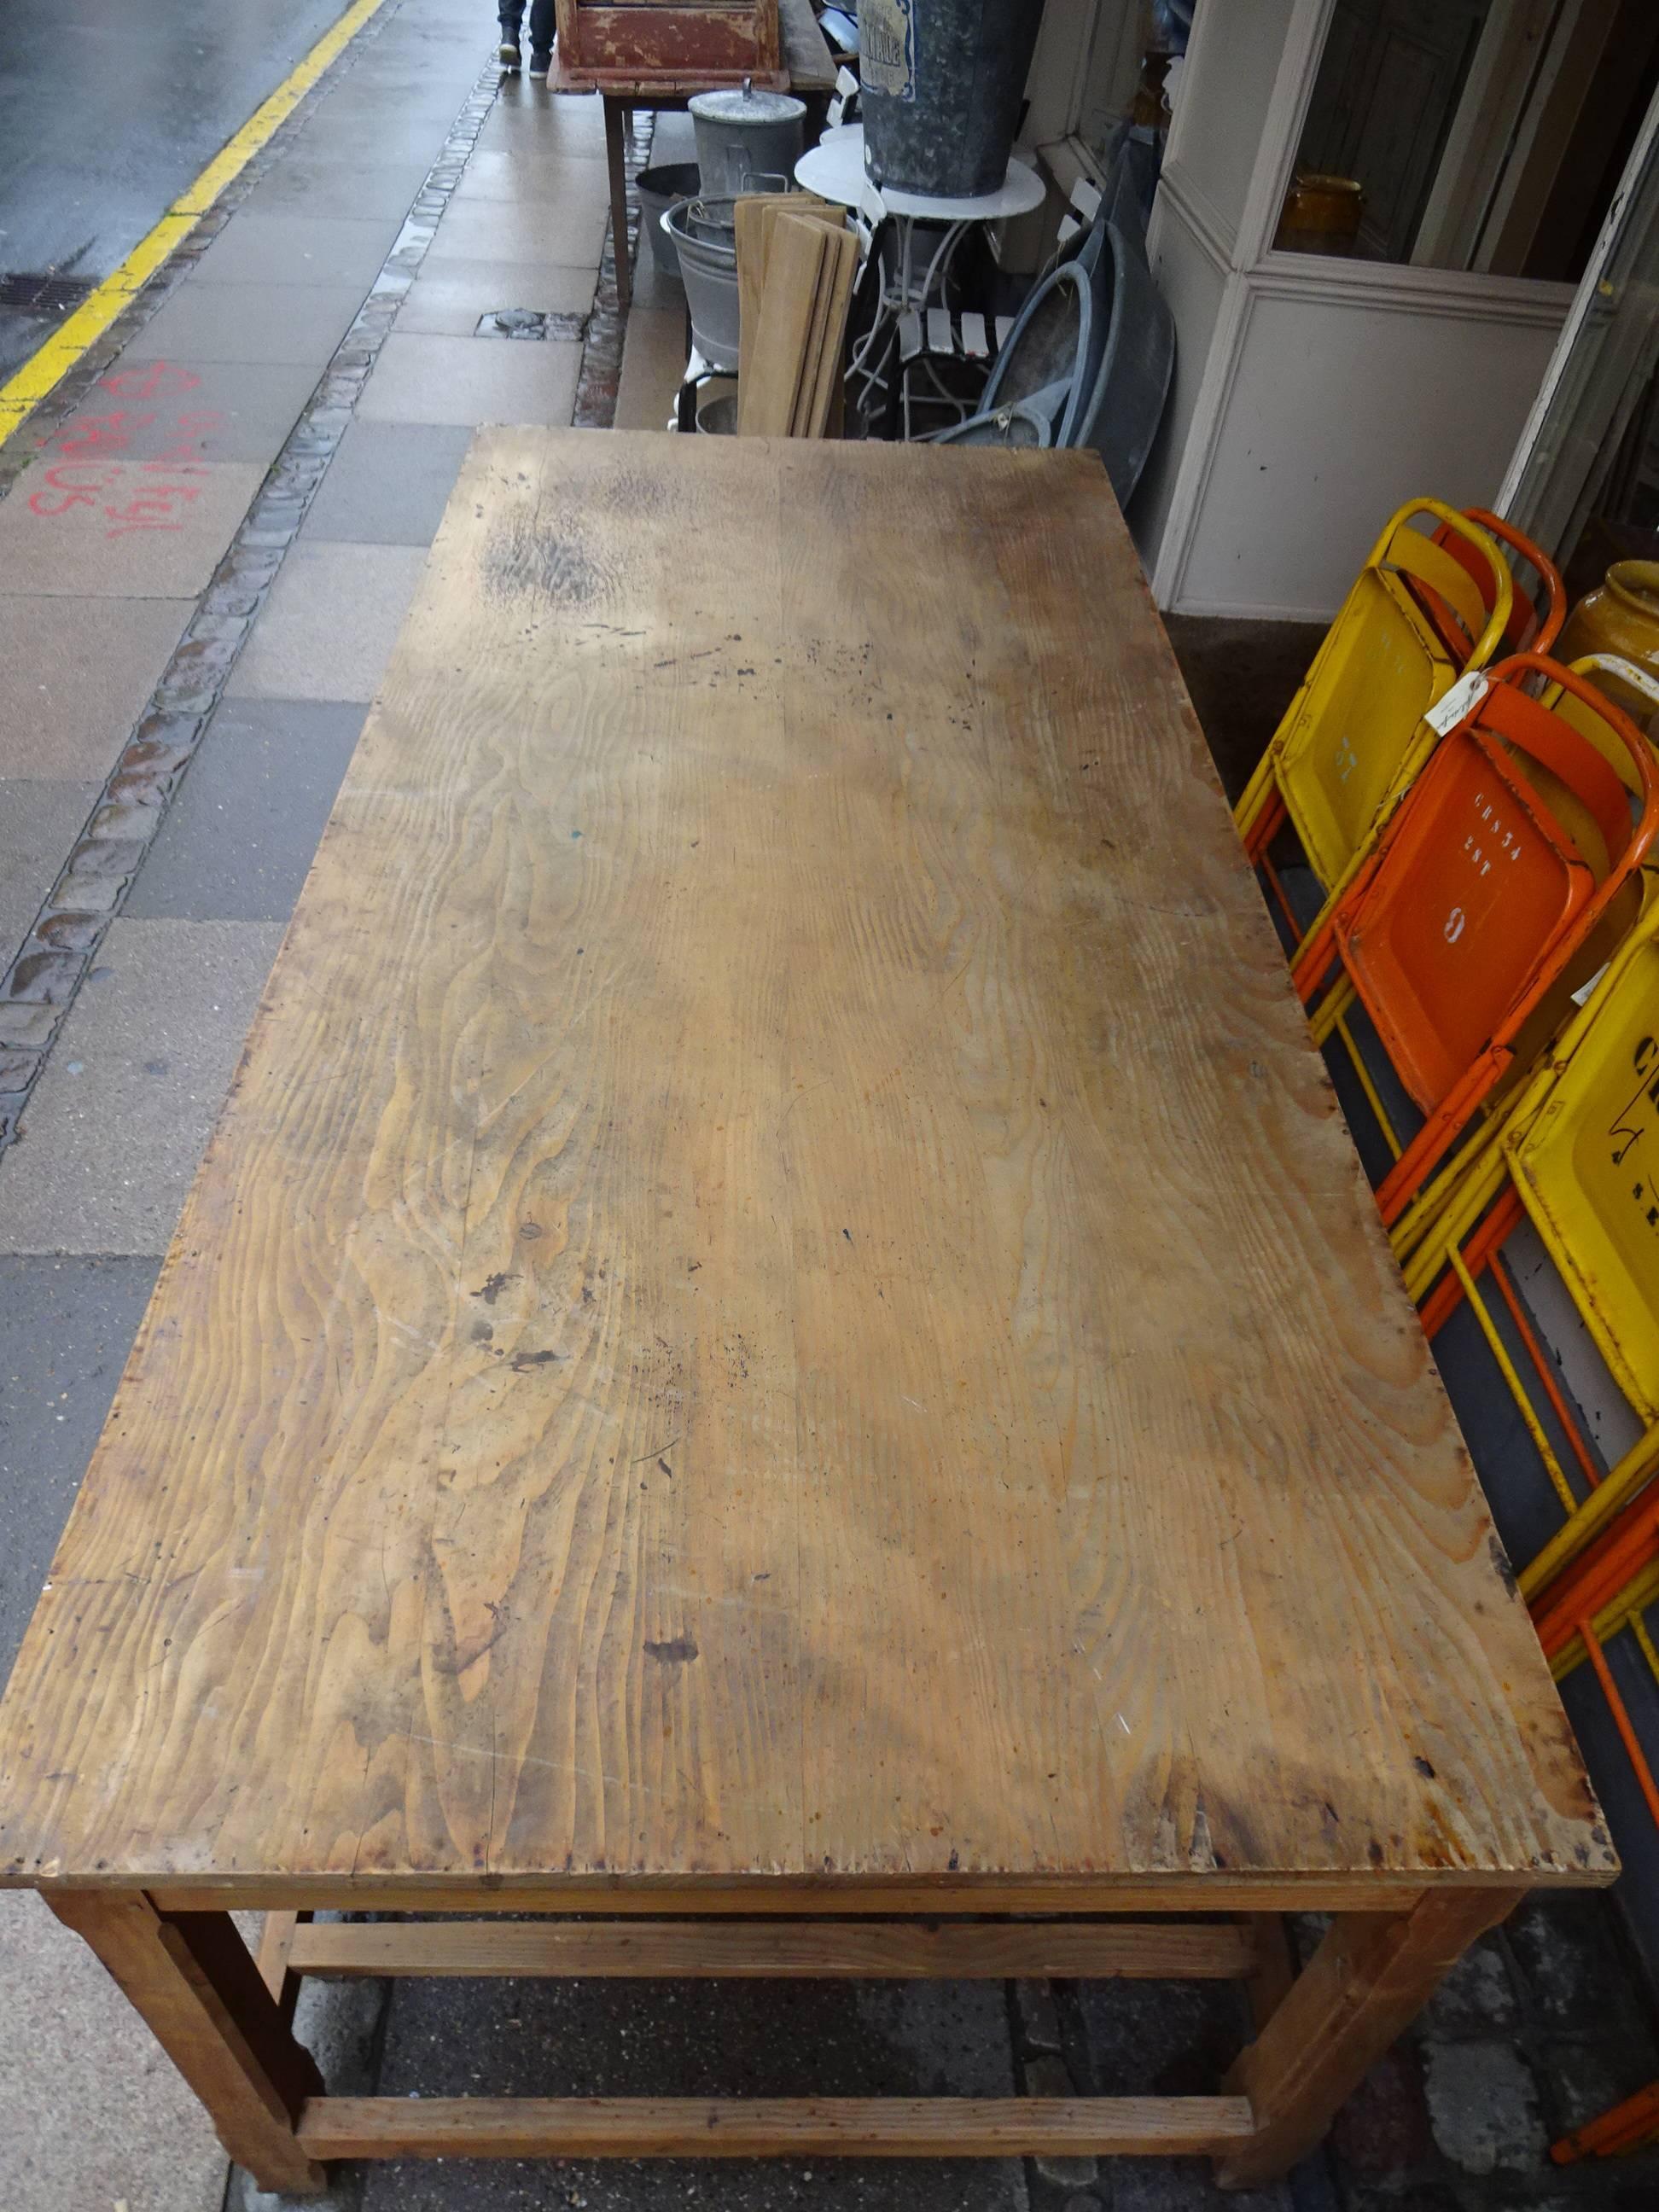 Gorgeous vintage French refectory table / work table with a lower slatted shelf. The table would be super shop inventory, or as a work table in the spacious kitchen. Genuine patina.

Measures: H 80 x L 225 x W 99 cm.